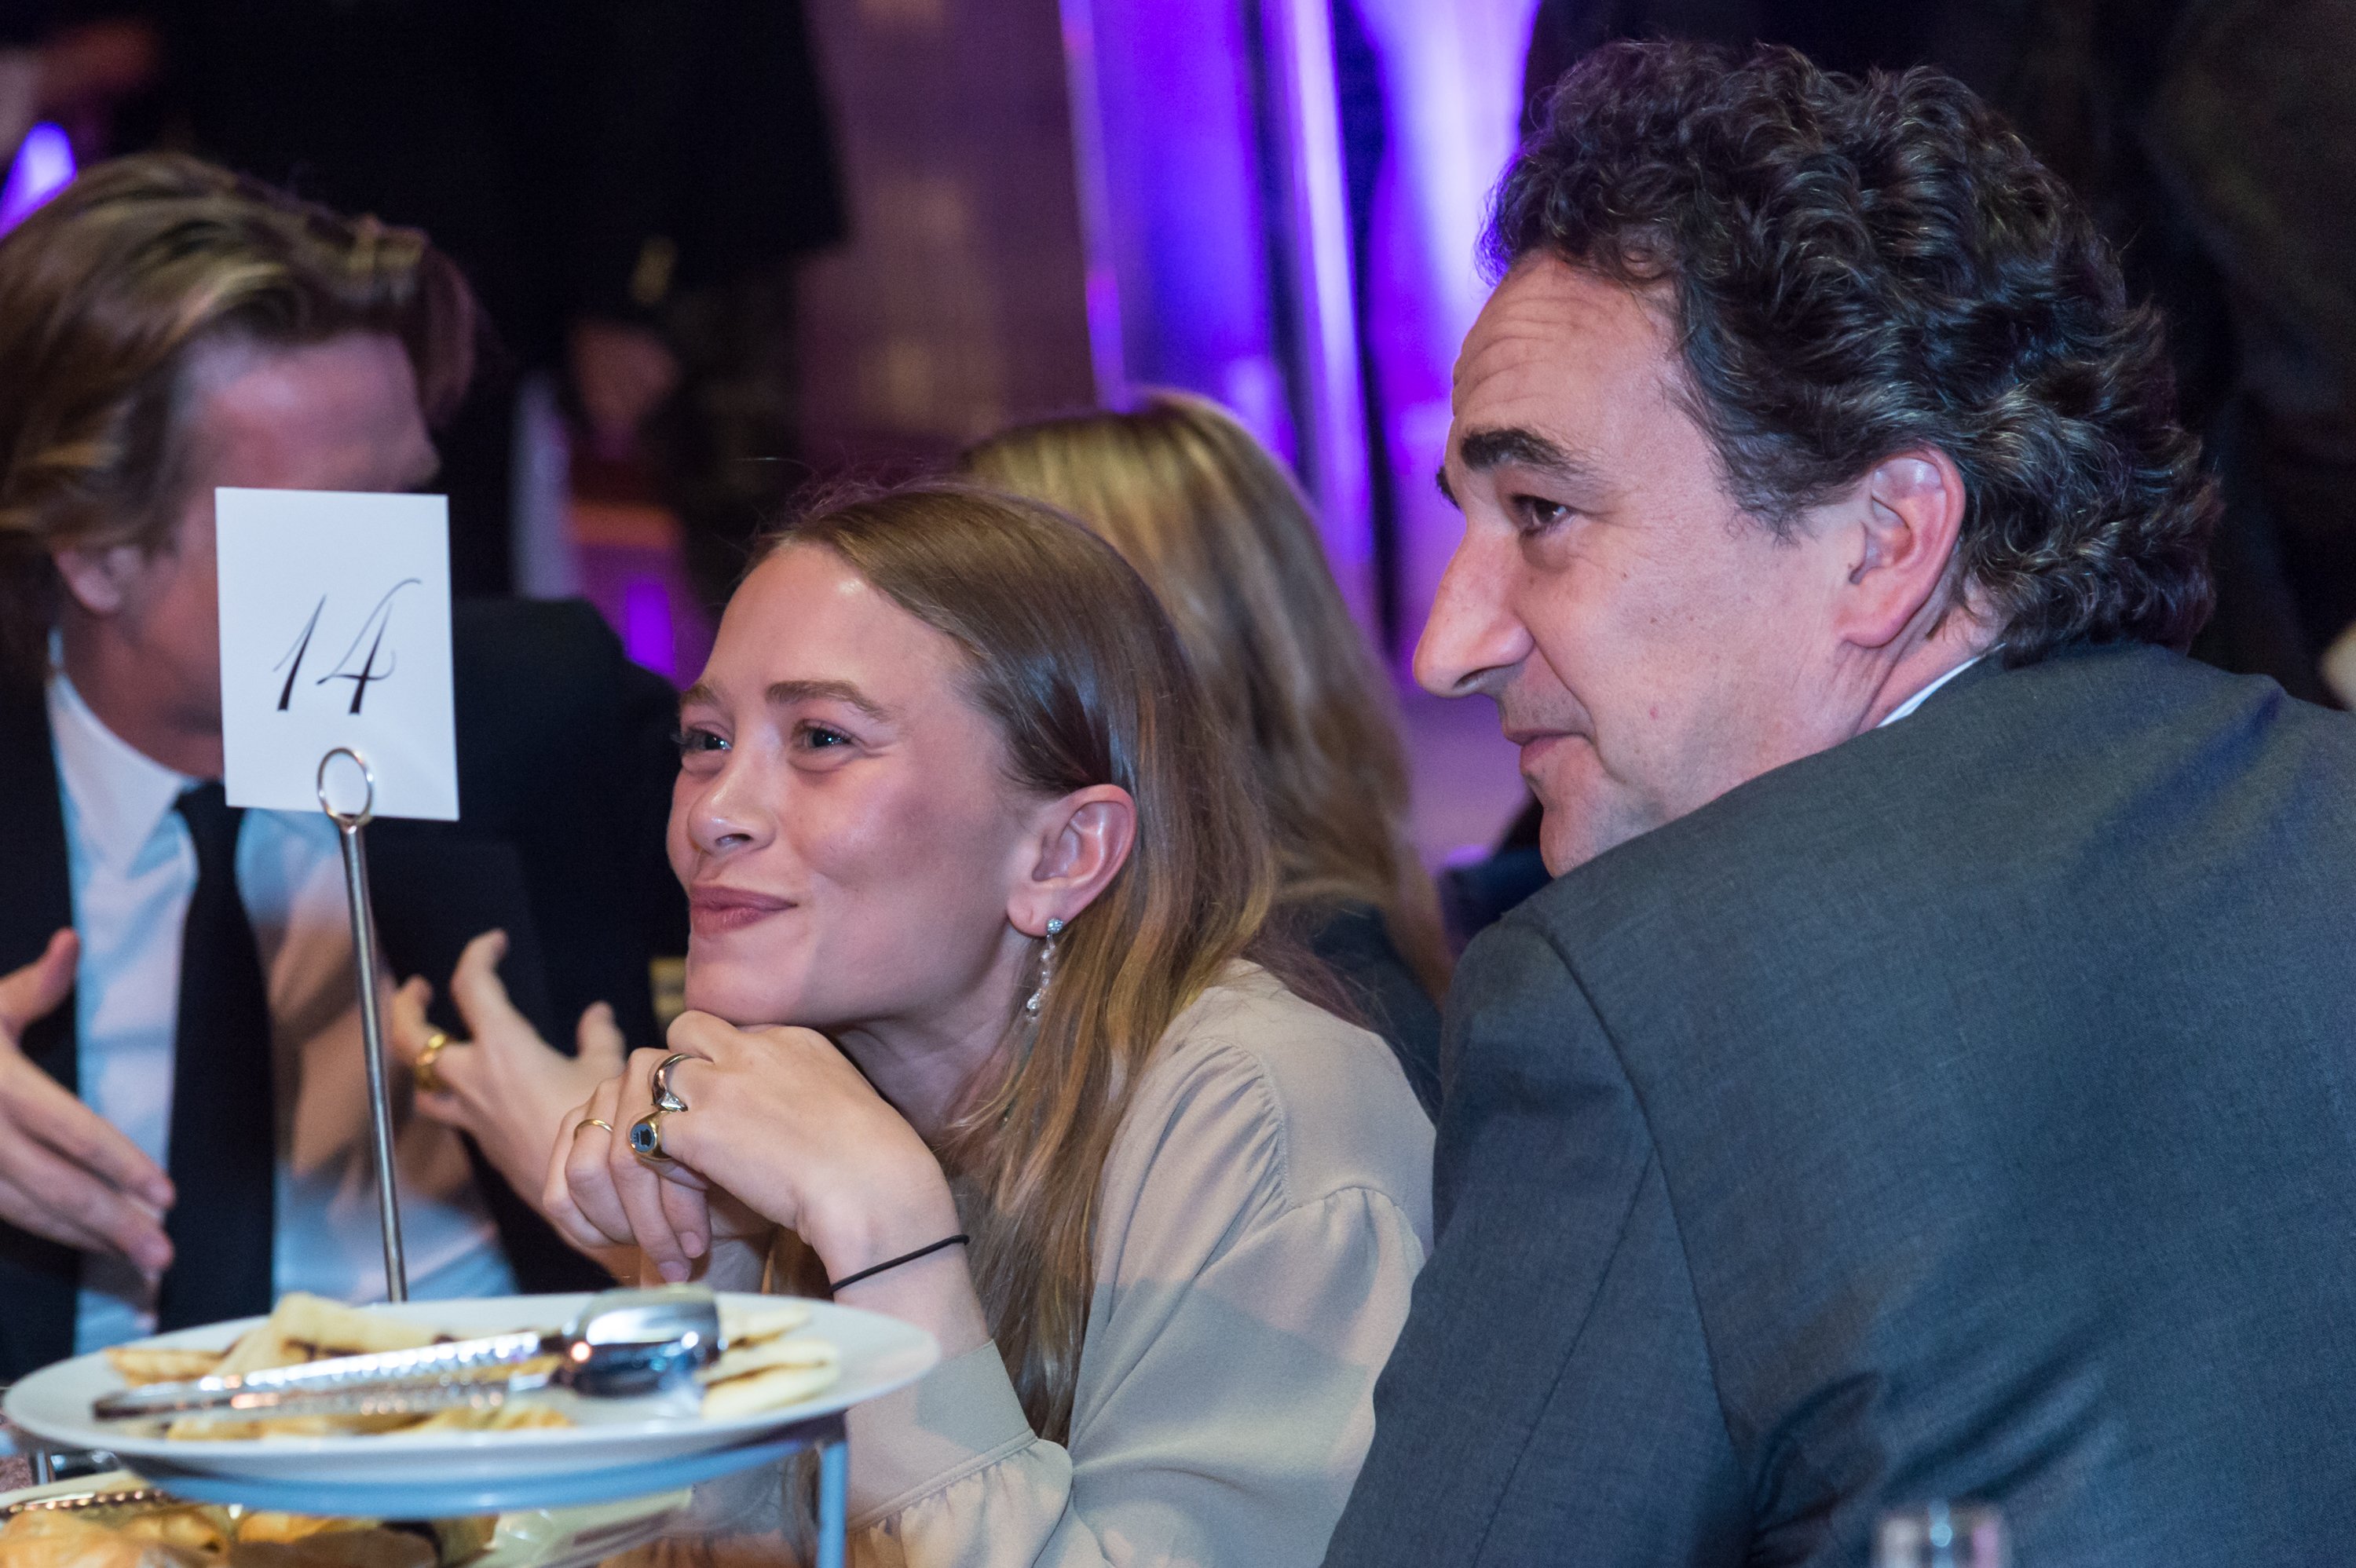 Mary-Kate Olsen and Olivier Sarkozy during the Youth America Grand Prix at David H. Koch Theater at Lincoln Center on April 19, 2018 in New York City. / Source: Getty Images